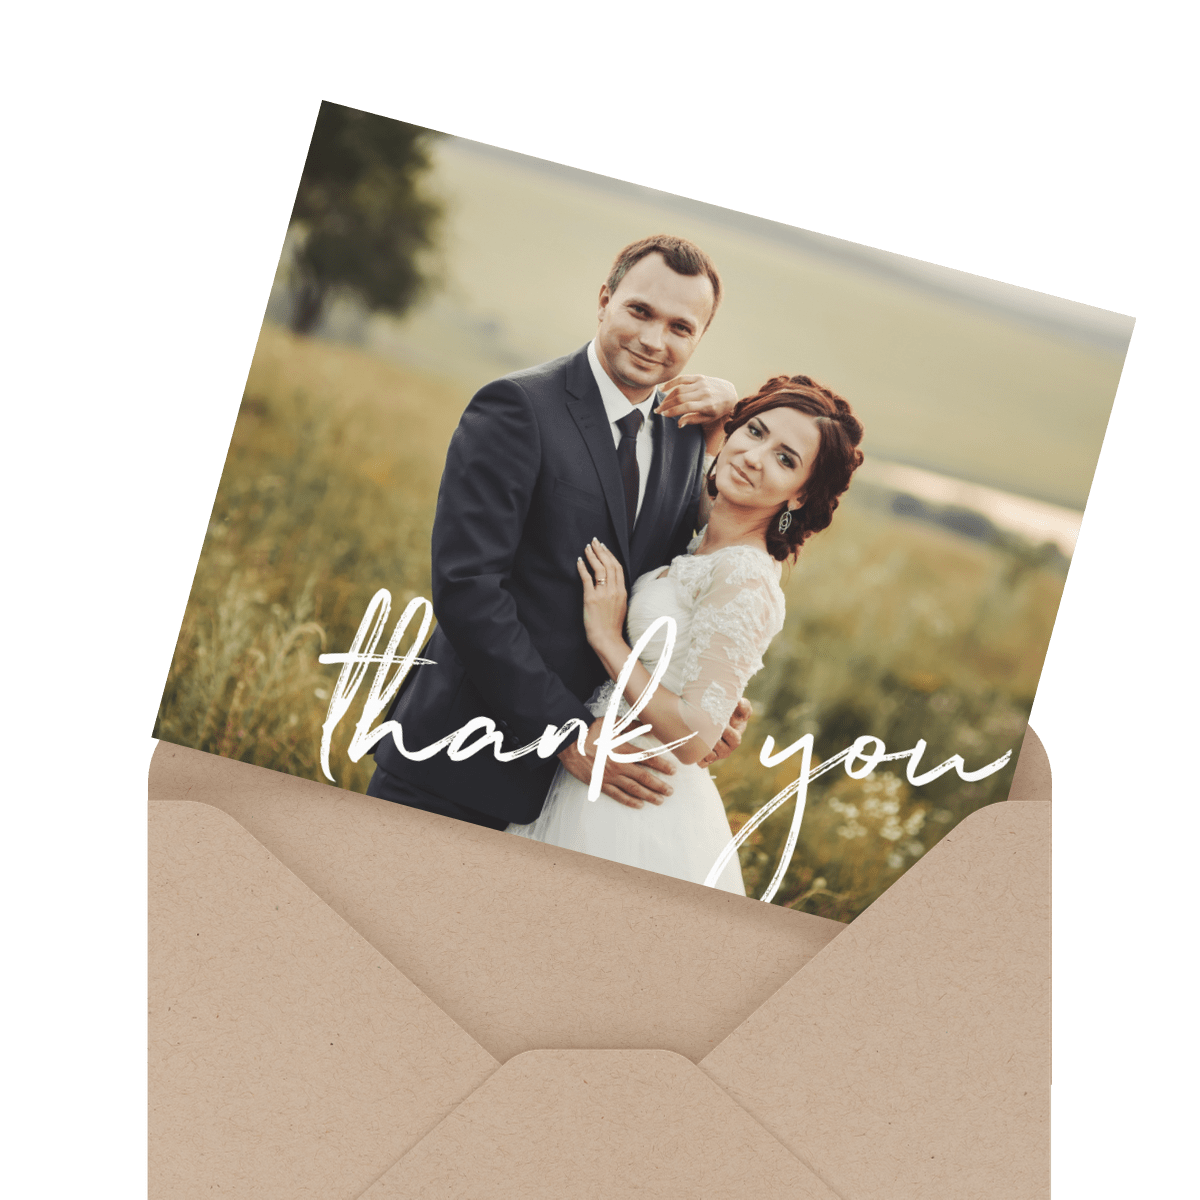 show original title Details about   Personalized photo wedding thank you cards 60 designs to choose from 10 20 